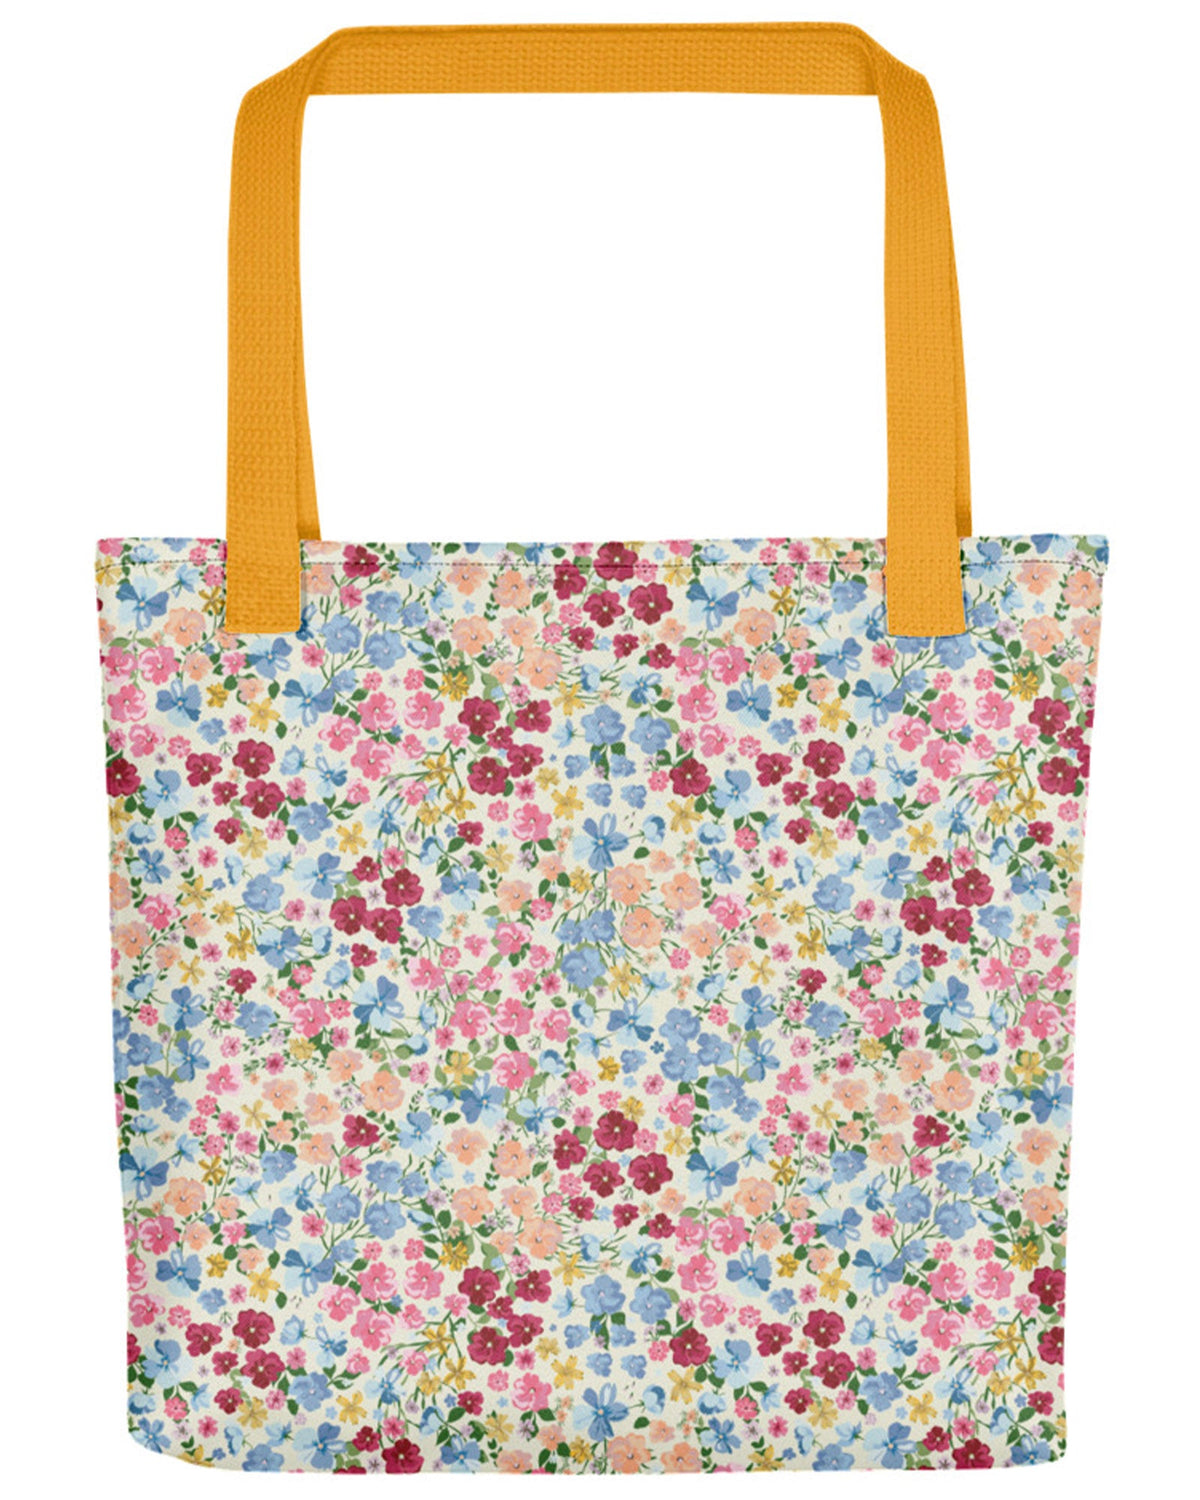 Edgy Star Tote Bag - The Vintage Garden